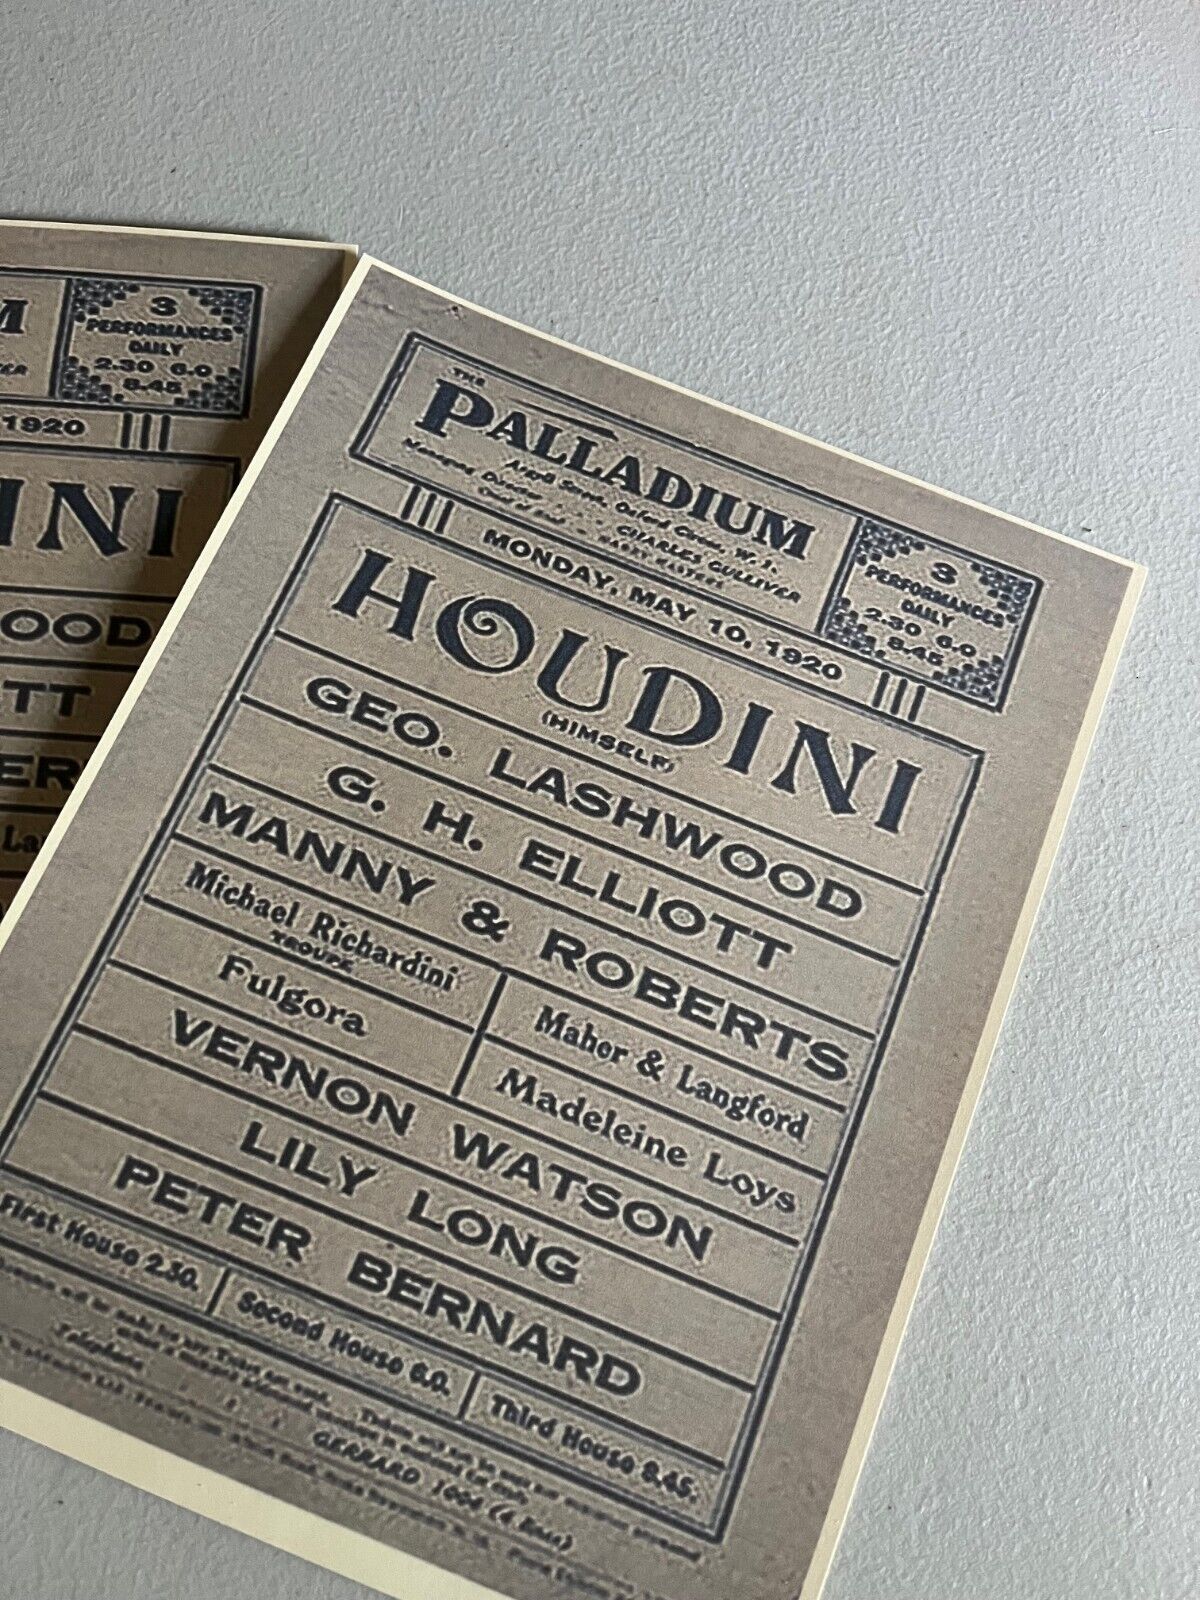 HOUDINI, reprint broadside for his appearance at the Palladium Theatre